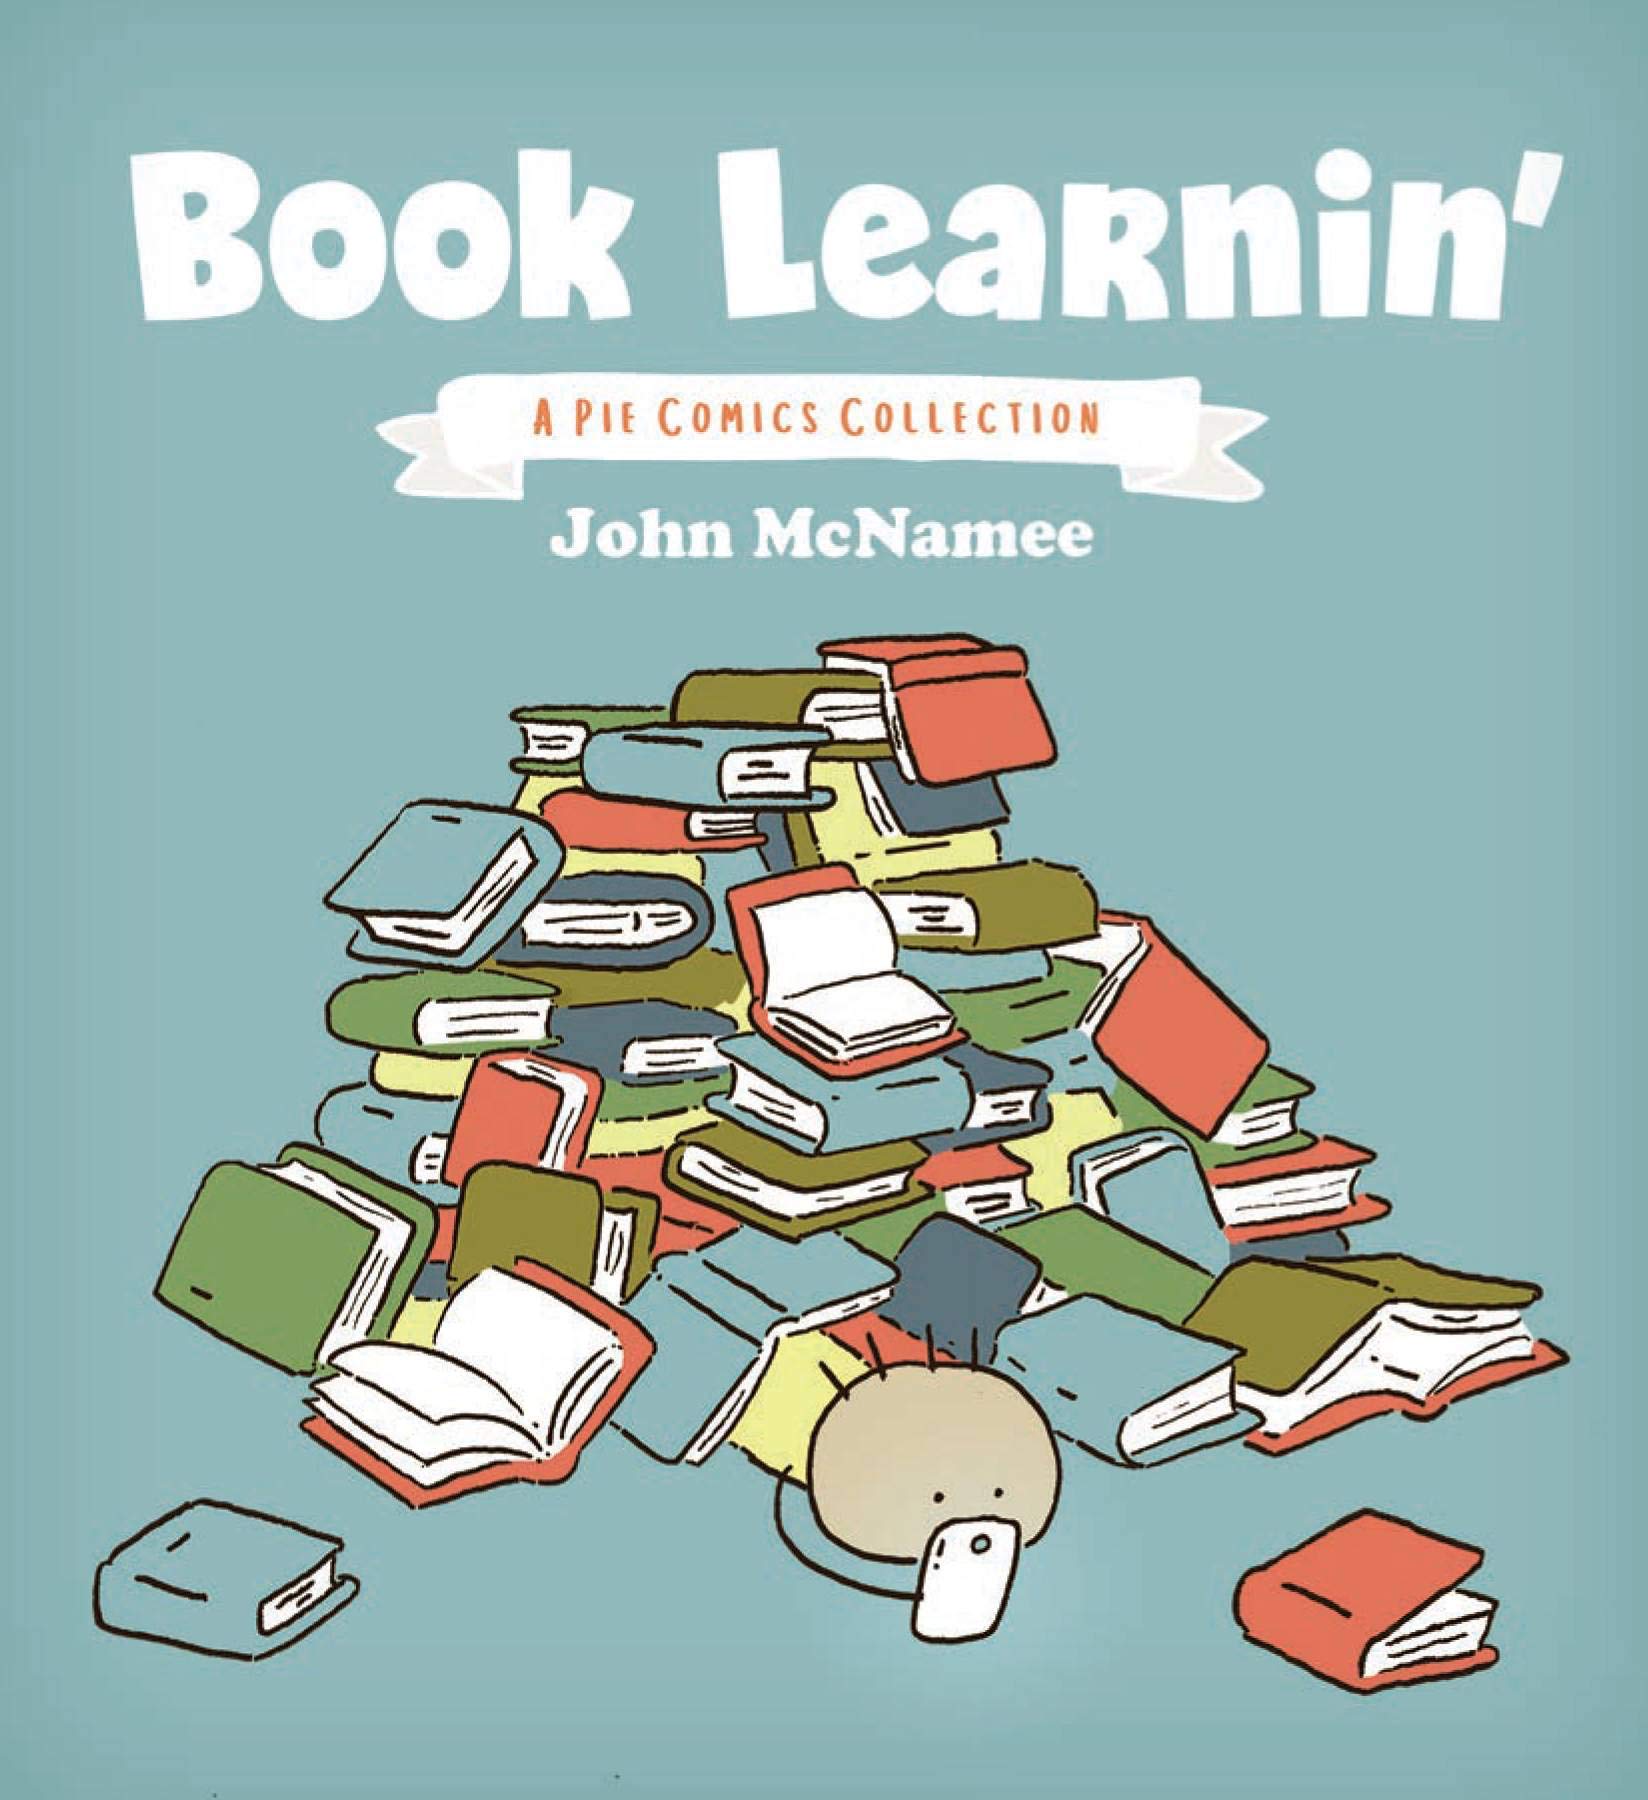 Book Learnin' - A Pie Comics Collection